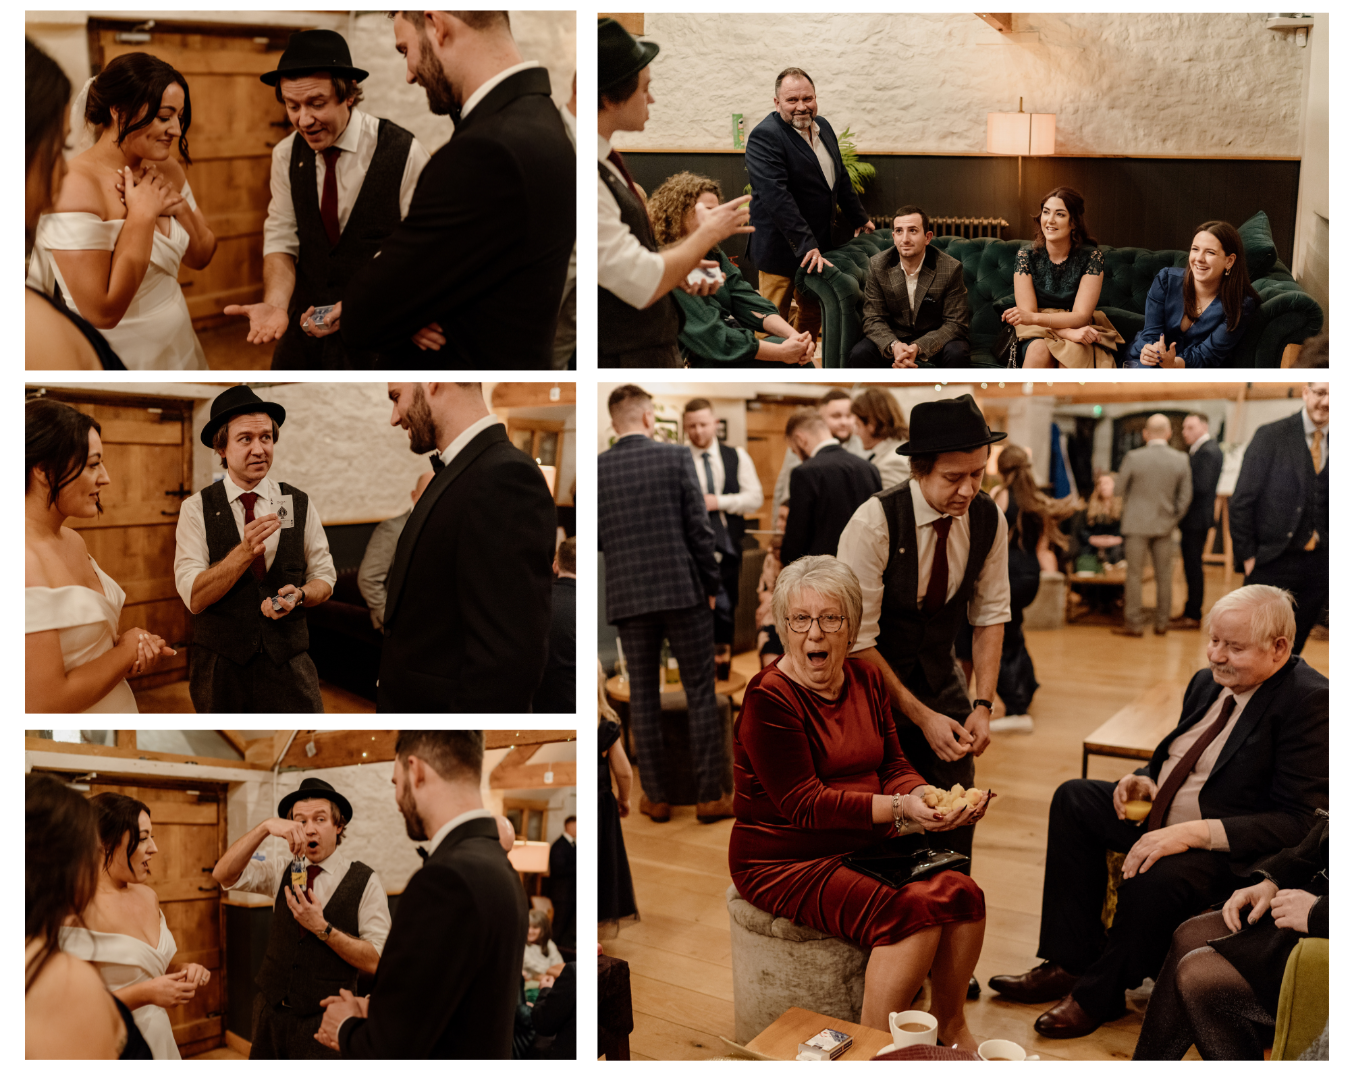 A collage of photos of people at a wedding reception.